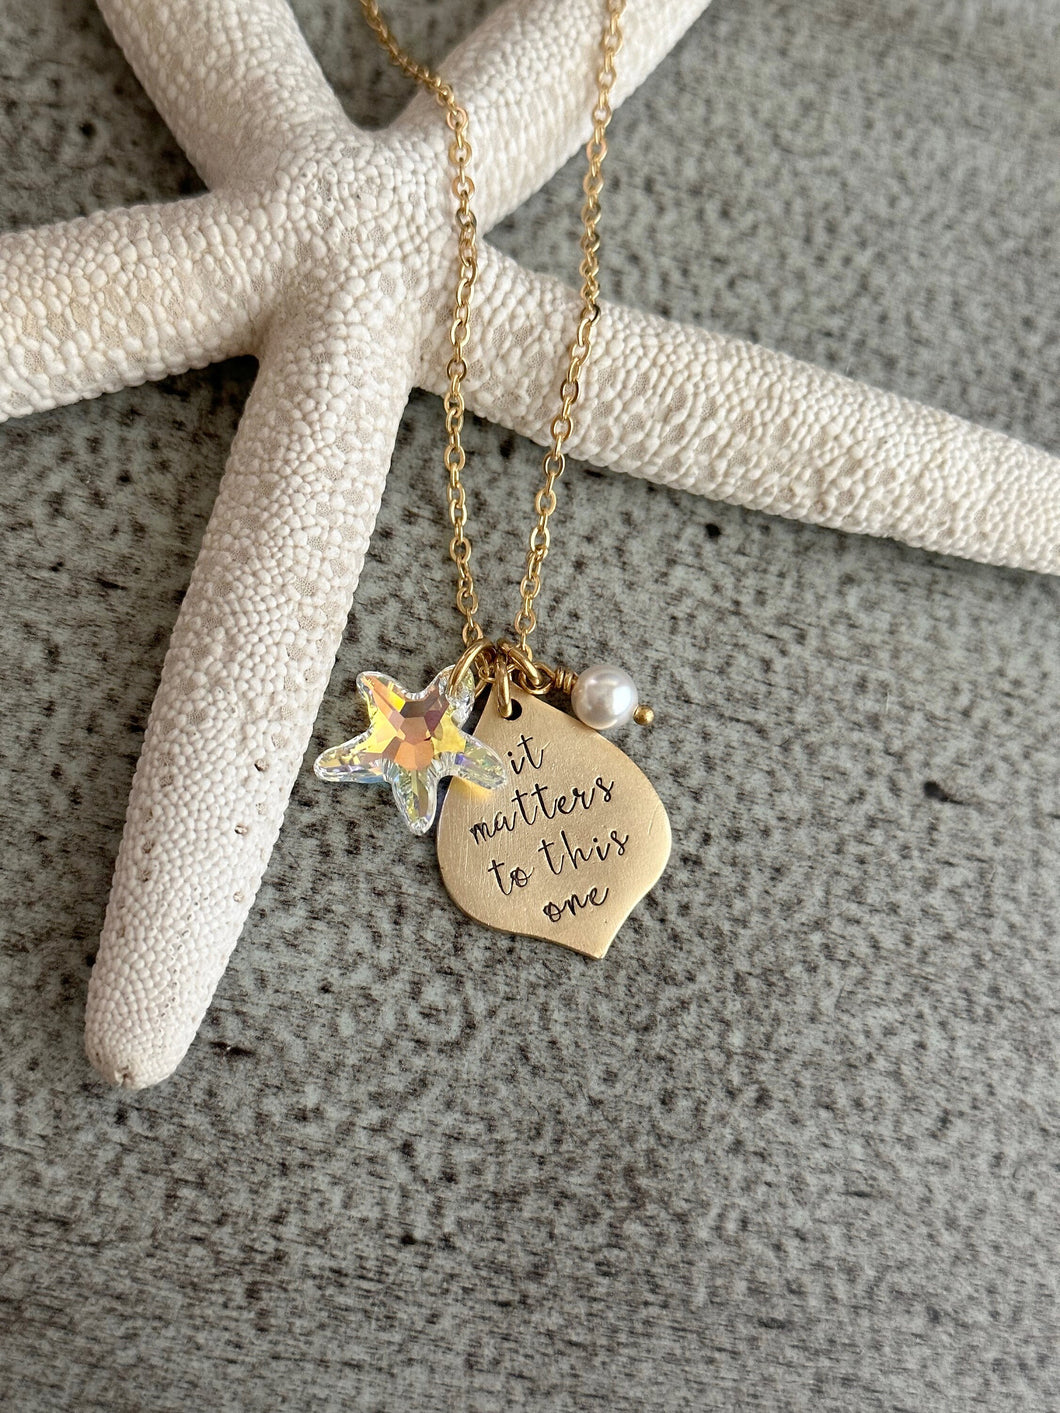 it matters to this one quote necklace - the starfish story - Teacher gift idea from student gold or silver pewter with crystal starfish